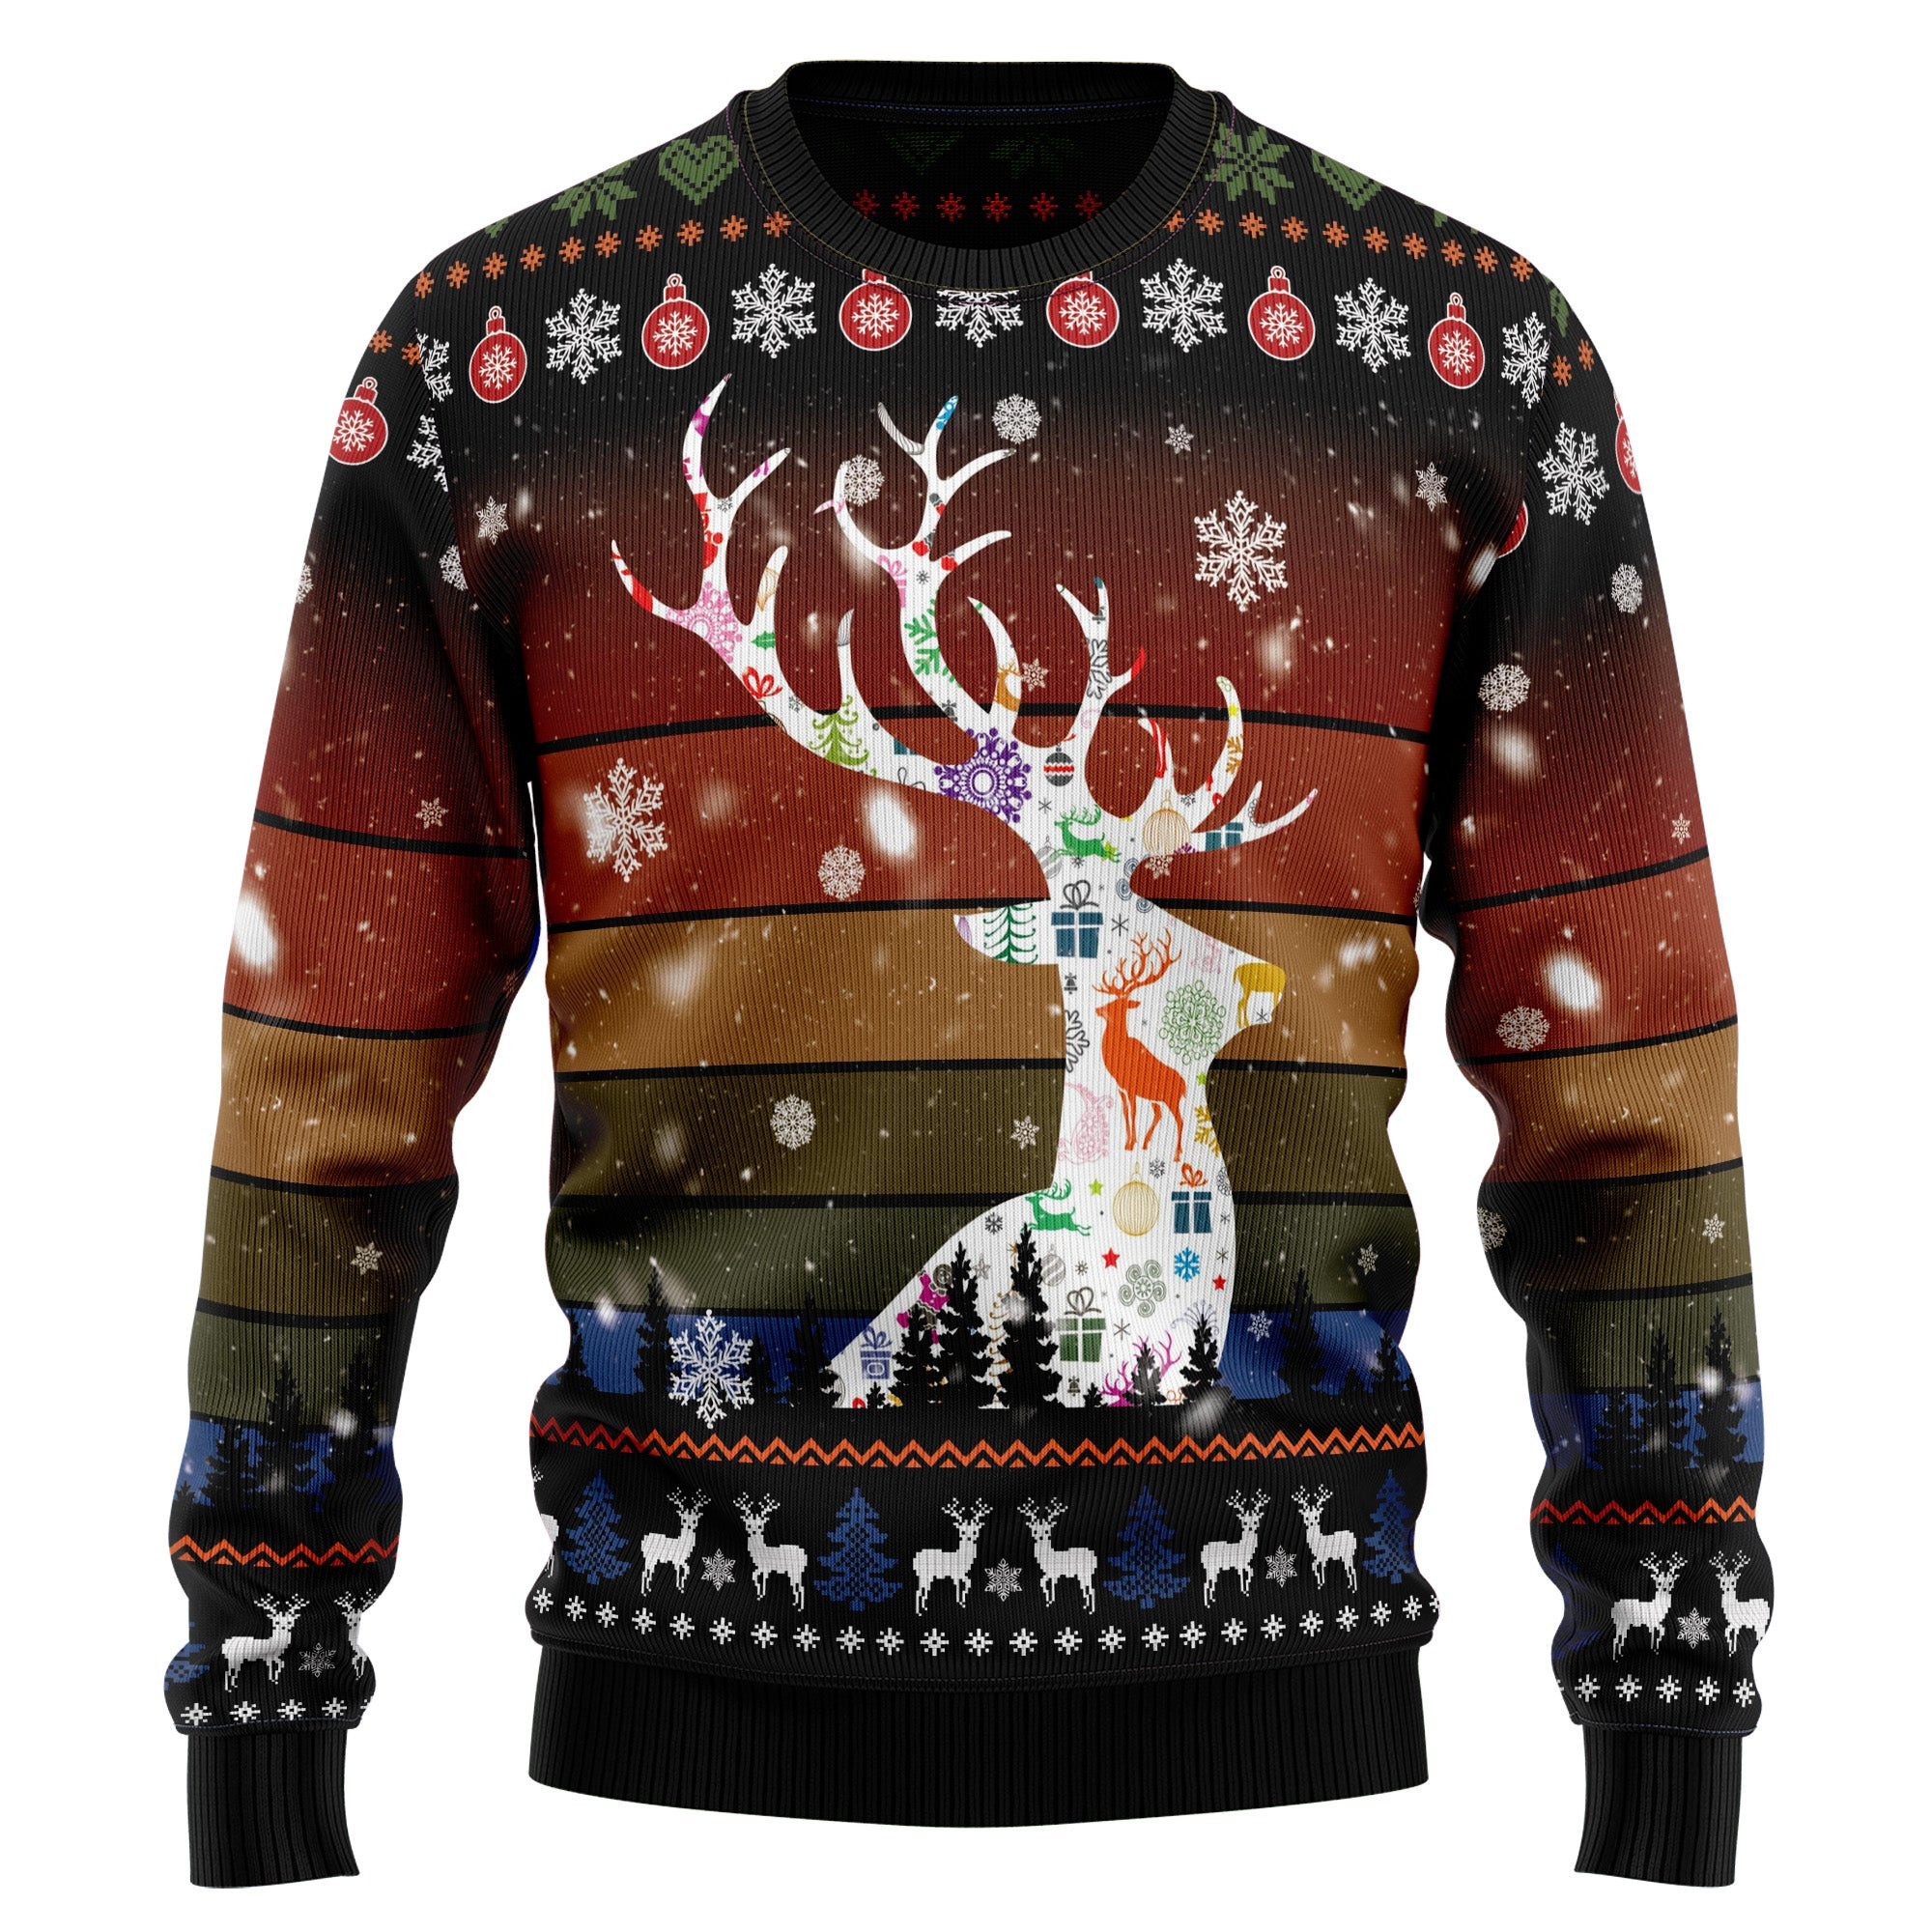 Vintage Background Awesome Deer Ugly Christmas Sweater, Ugly Sweater For Men Women, Holiday Sweater